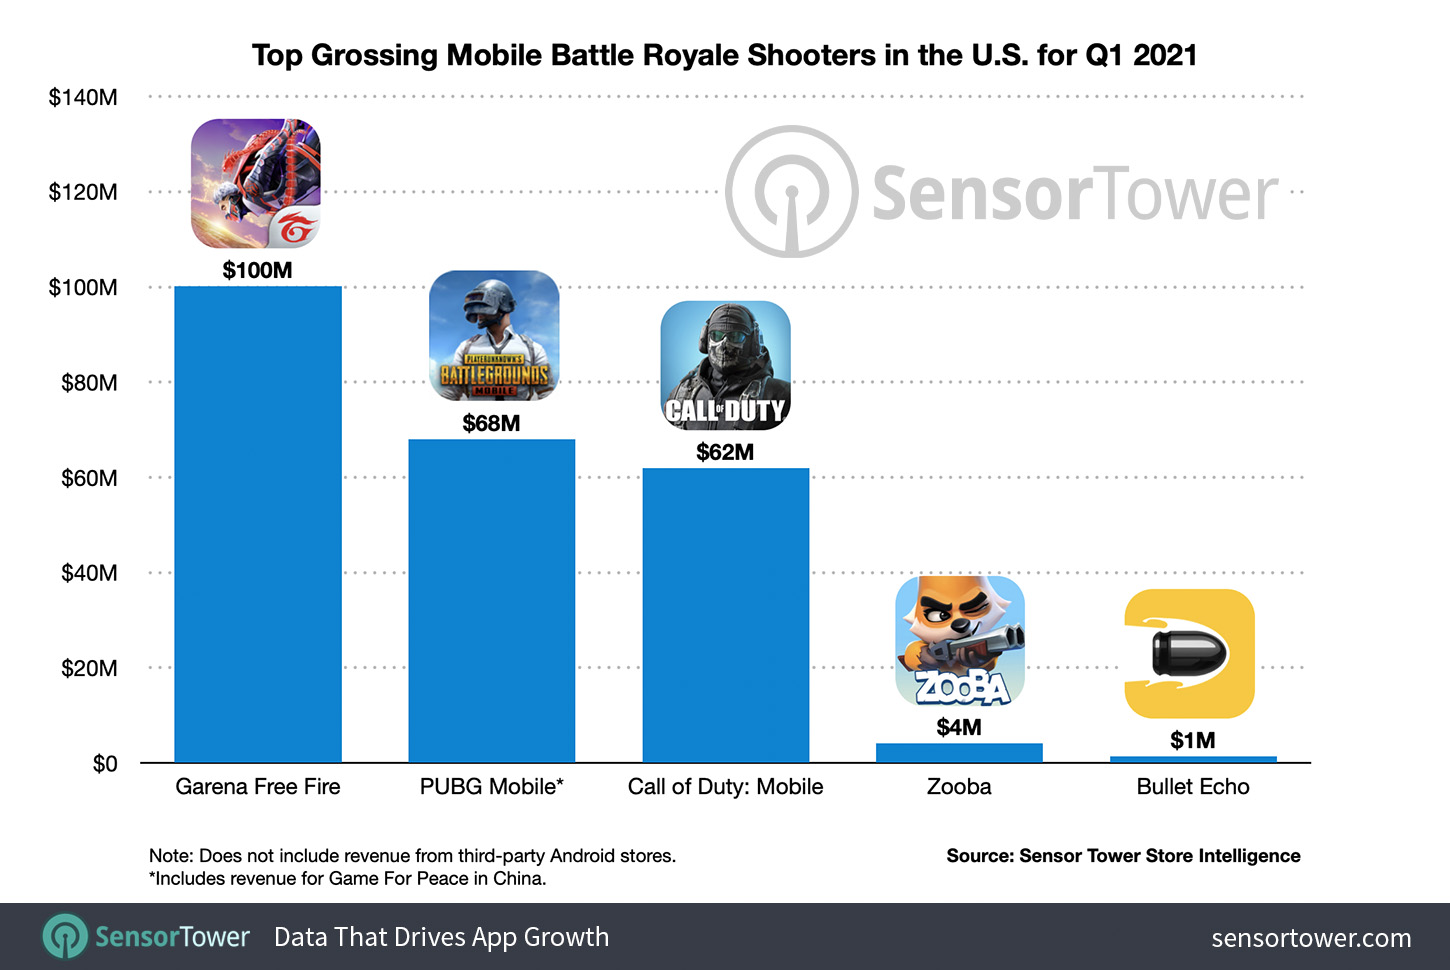 Top Grossing Mobile Battle Royale Shooters in the U.S. in Q1 2021